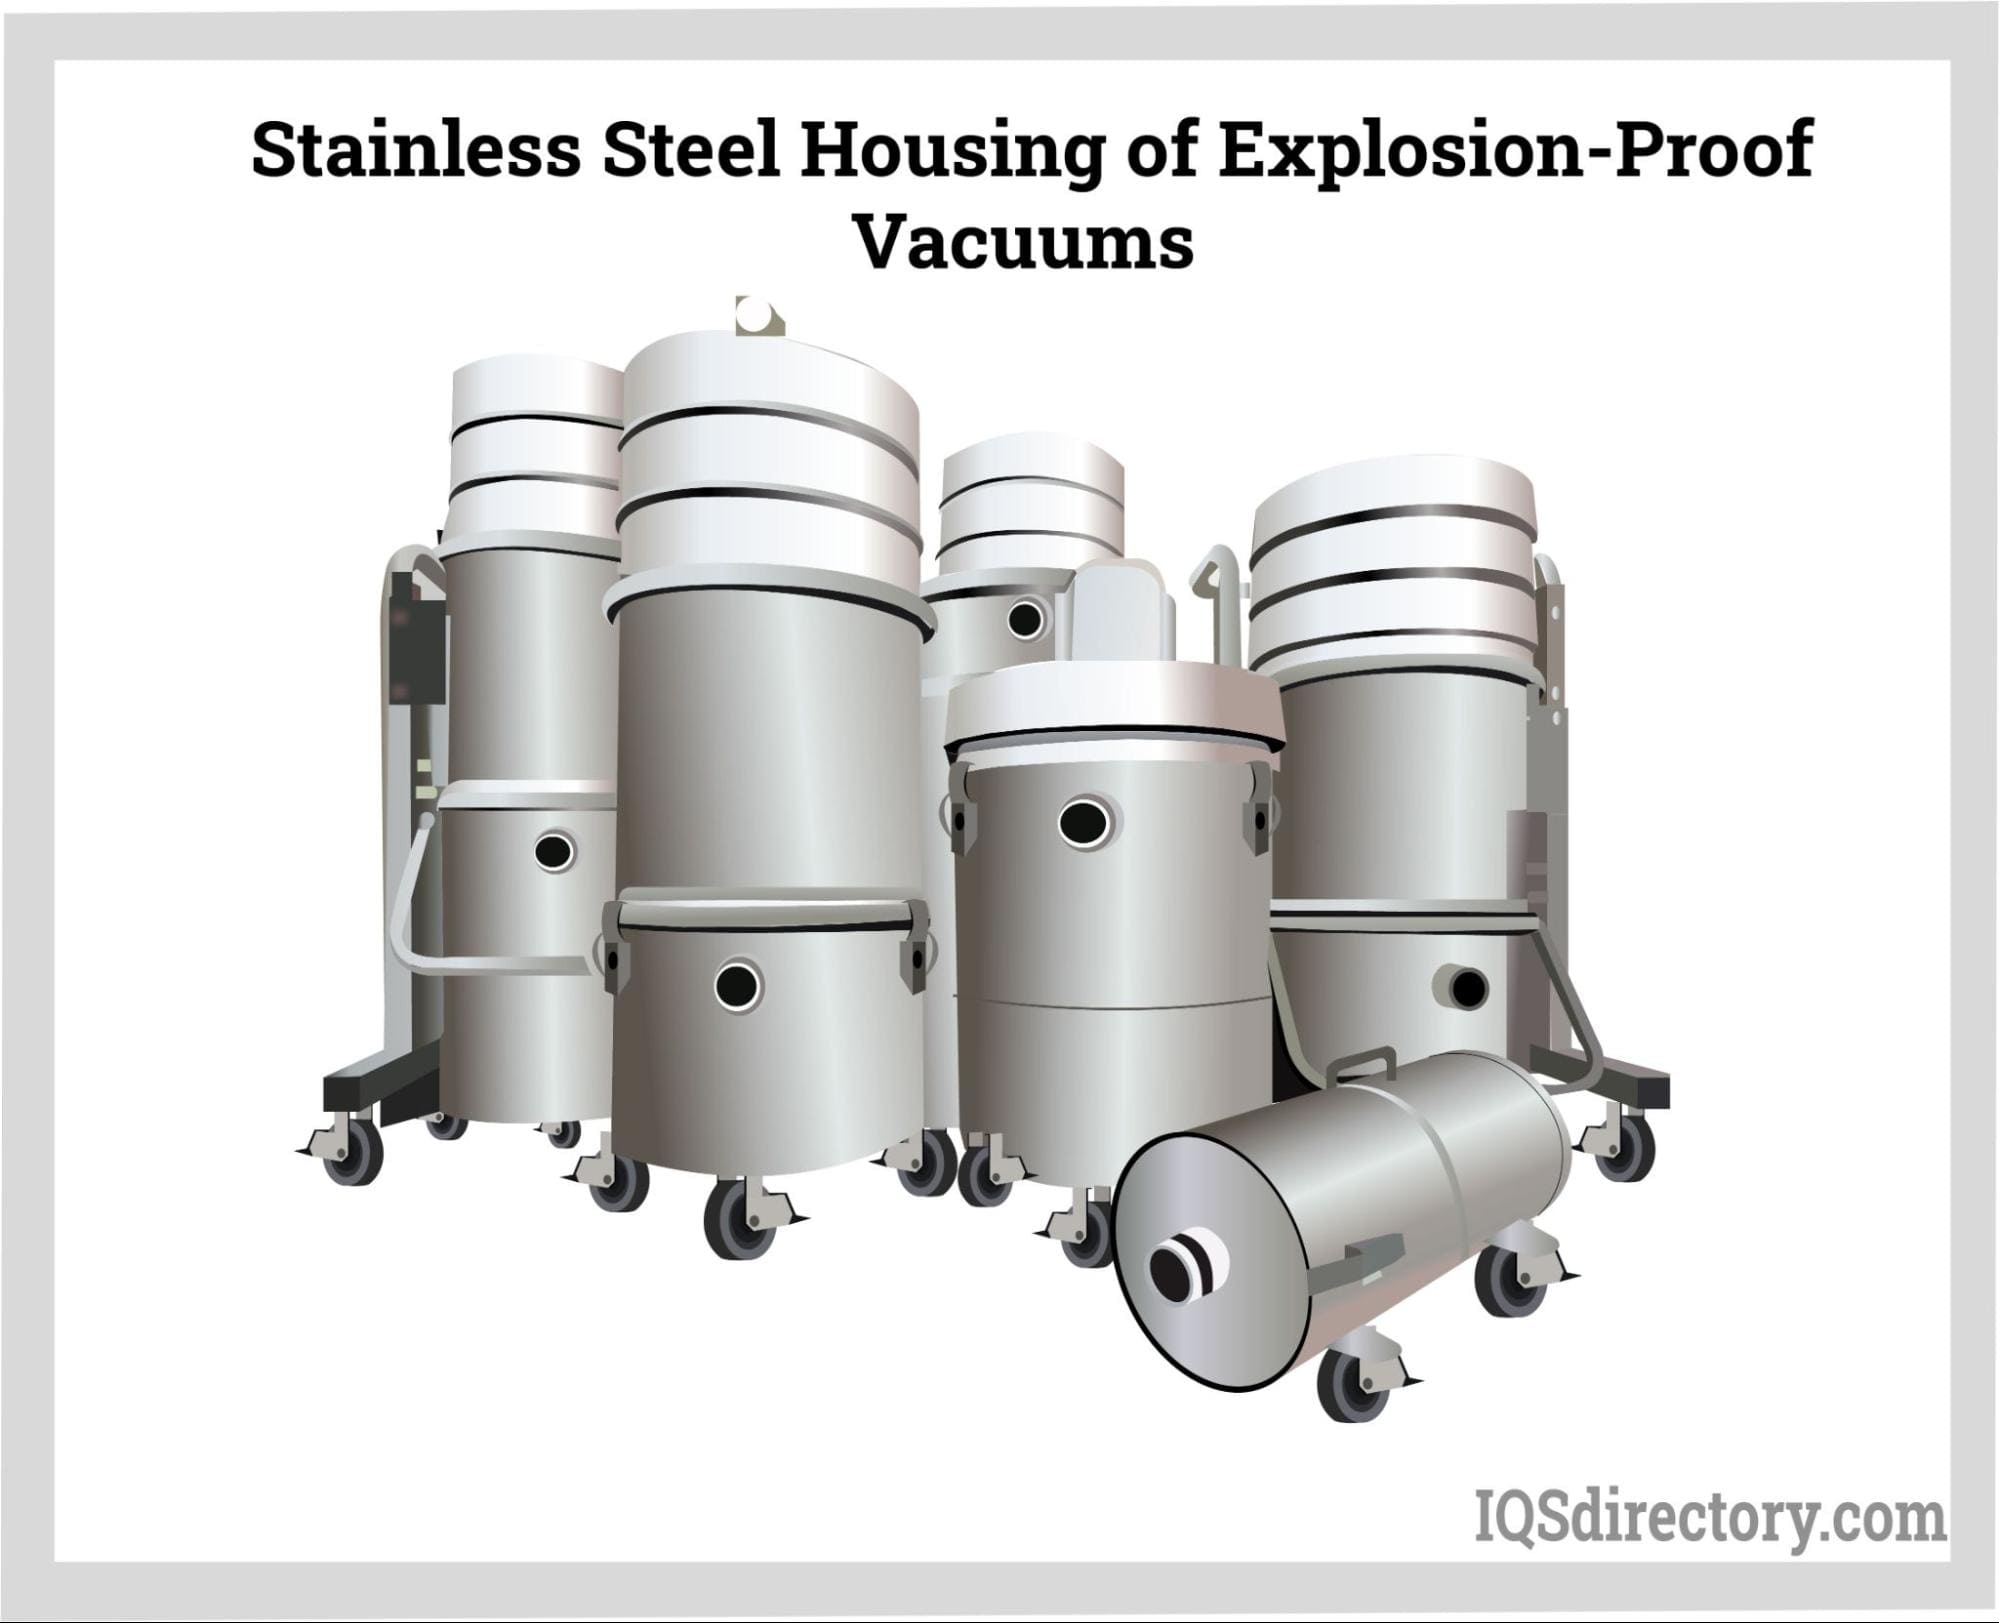 Stainless Steel Housing of Explosion-Proof Vacuums